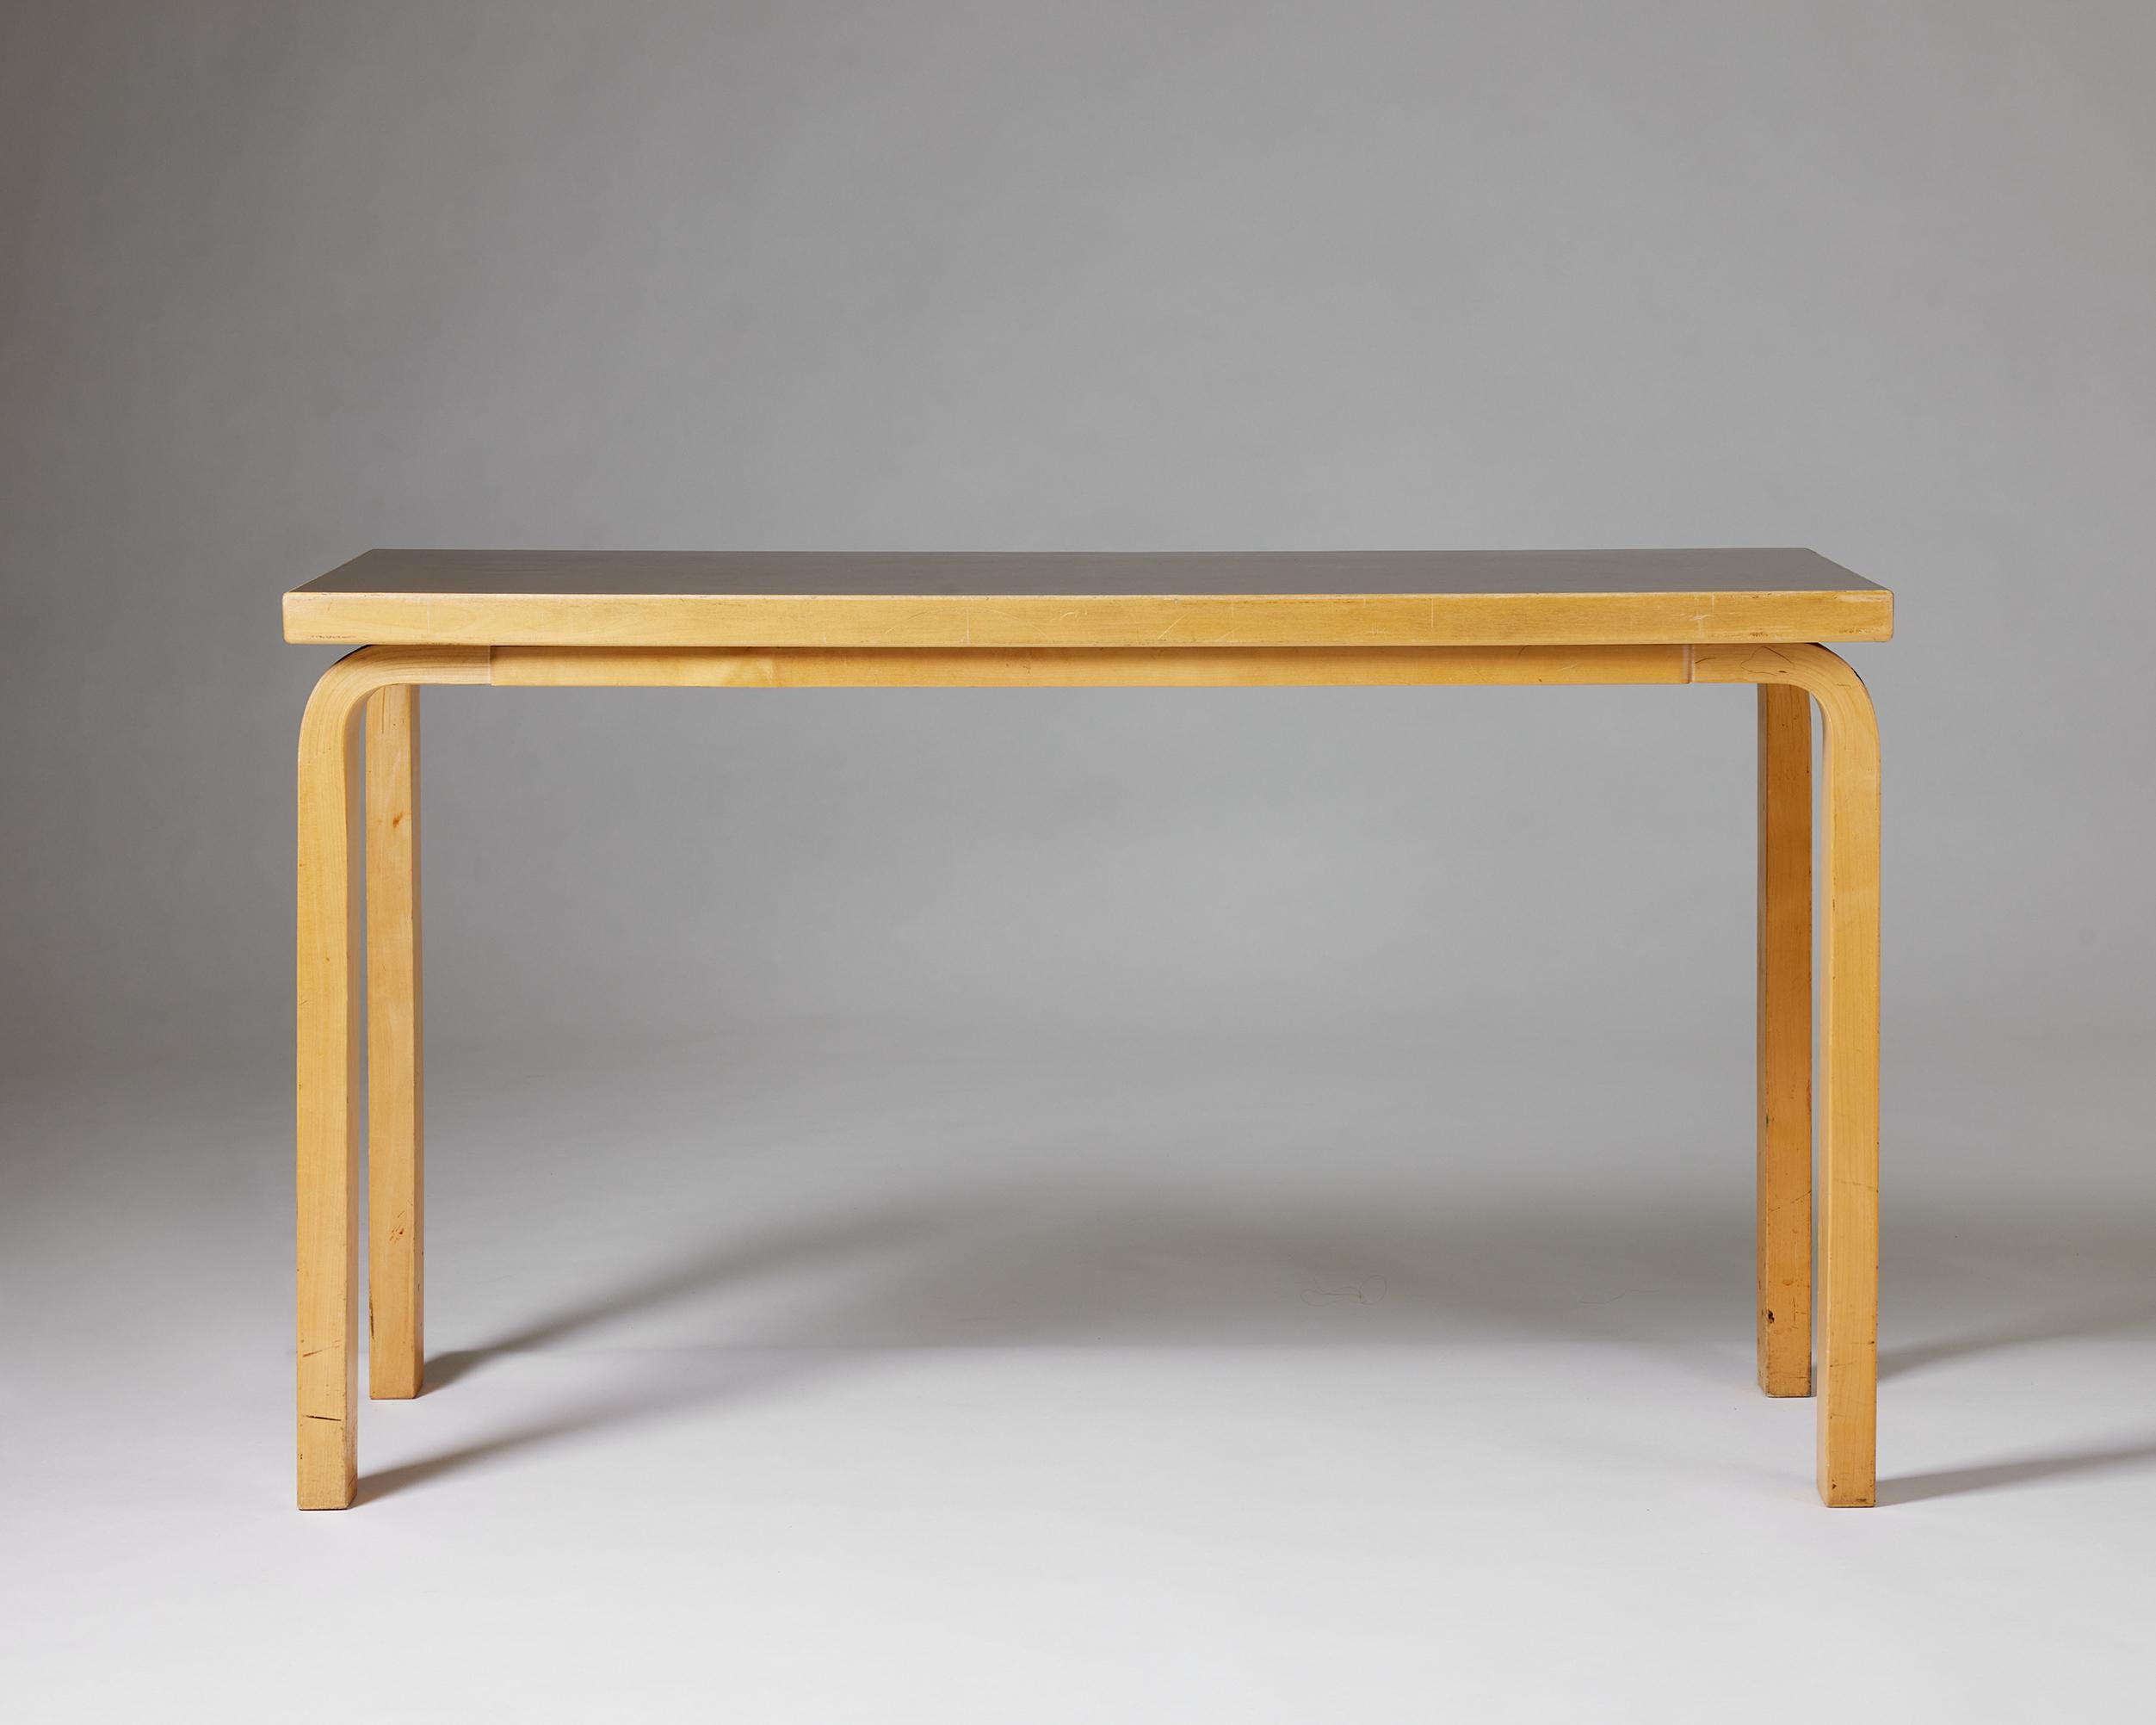 Mid-Century Modern Table designed by Alvar Aalto for Artek, Finland, 1970s, lacquered birch For Sale